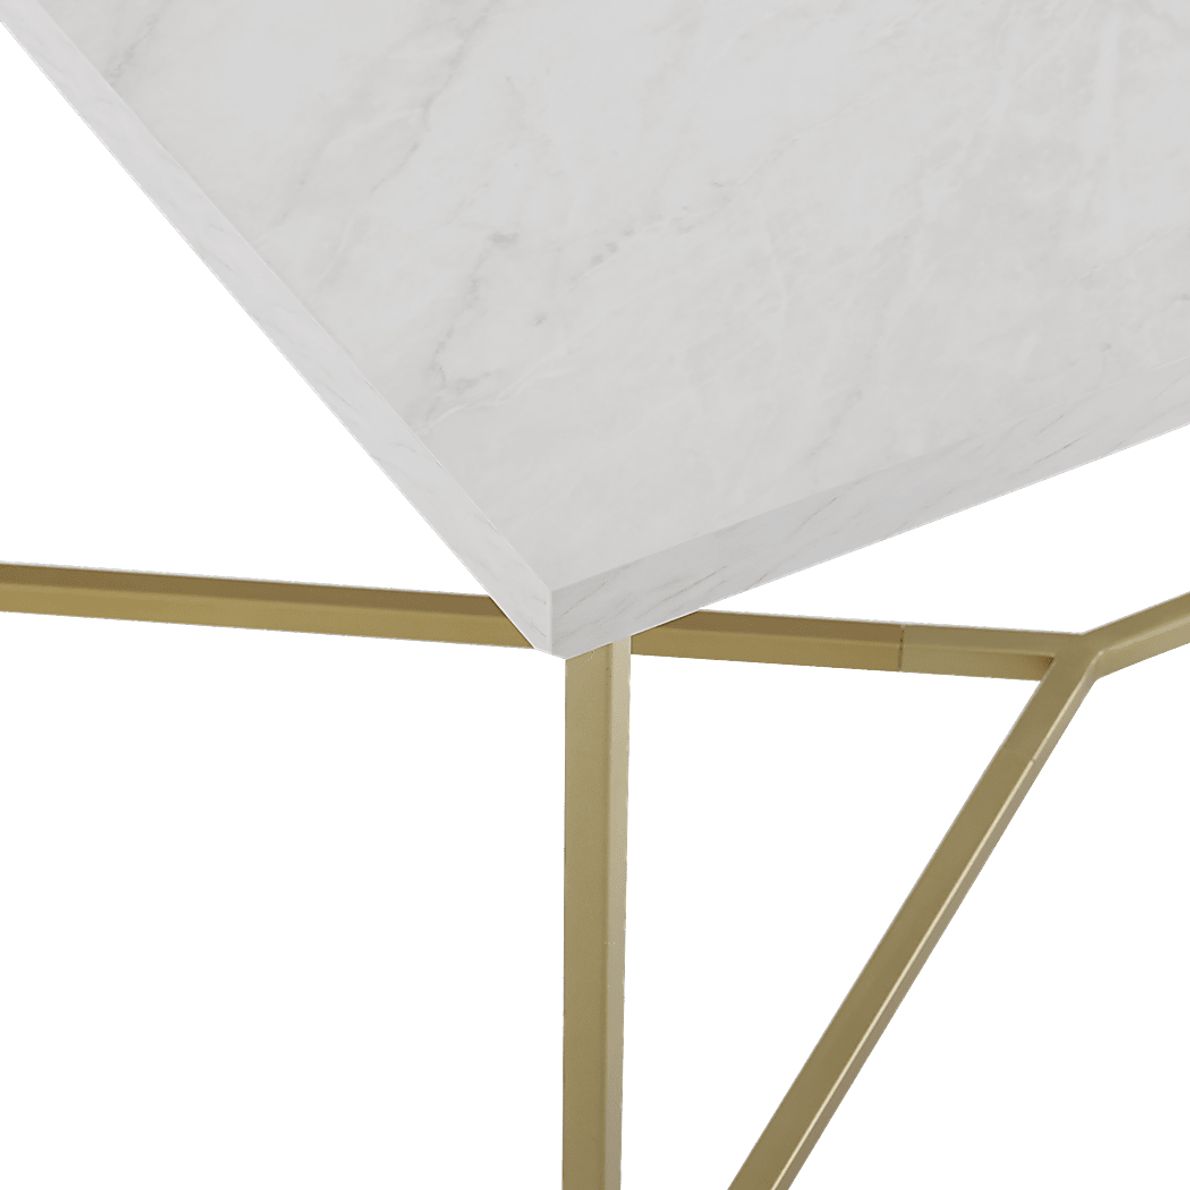 Briarwood Gold Cocktail Table